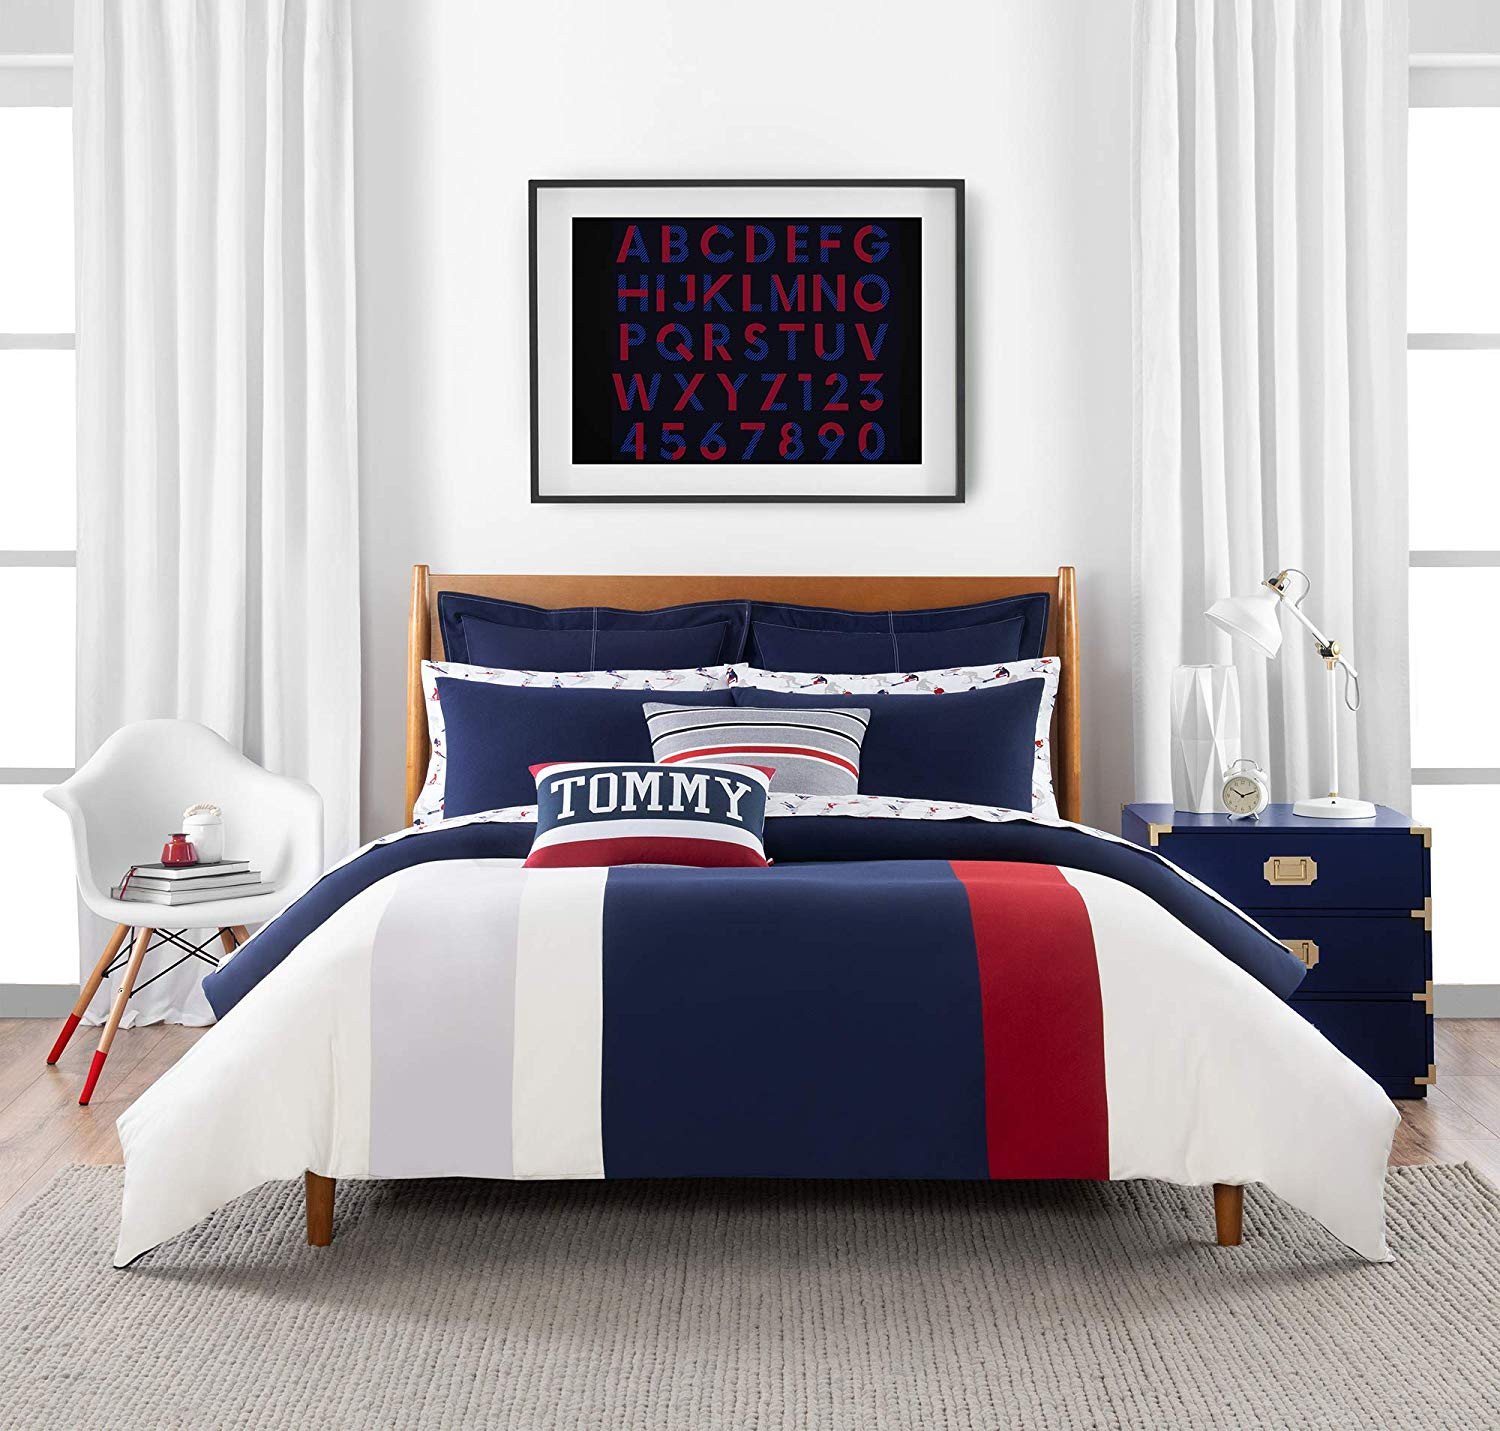 Bedroom Set for Girl Awesome Amazon tommy Hilfiger Clash Of 85 Stripe Bedding